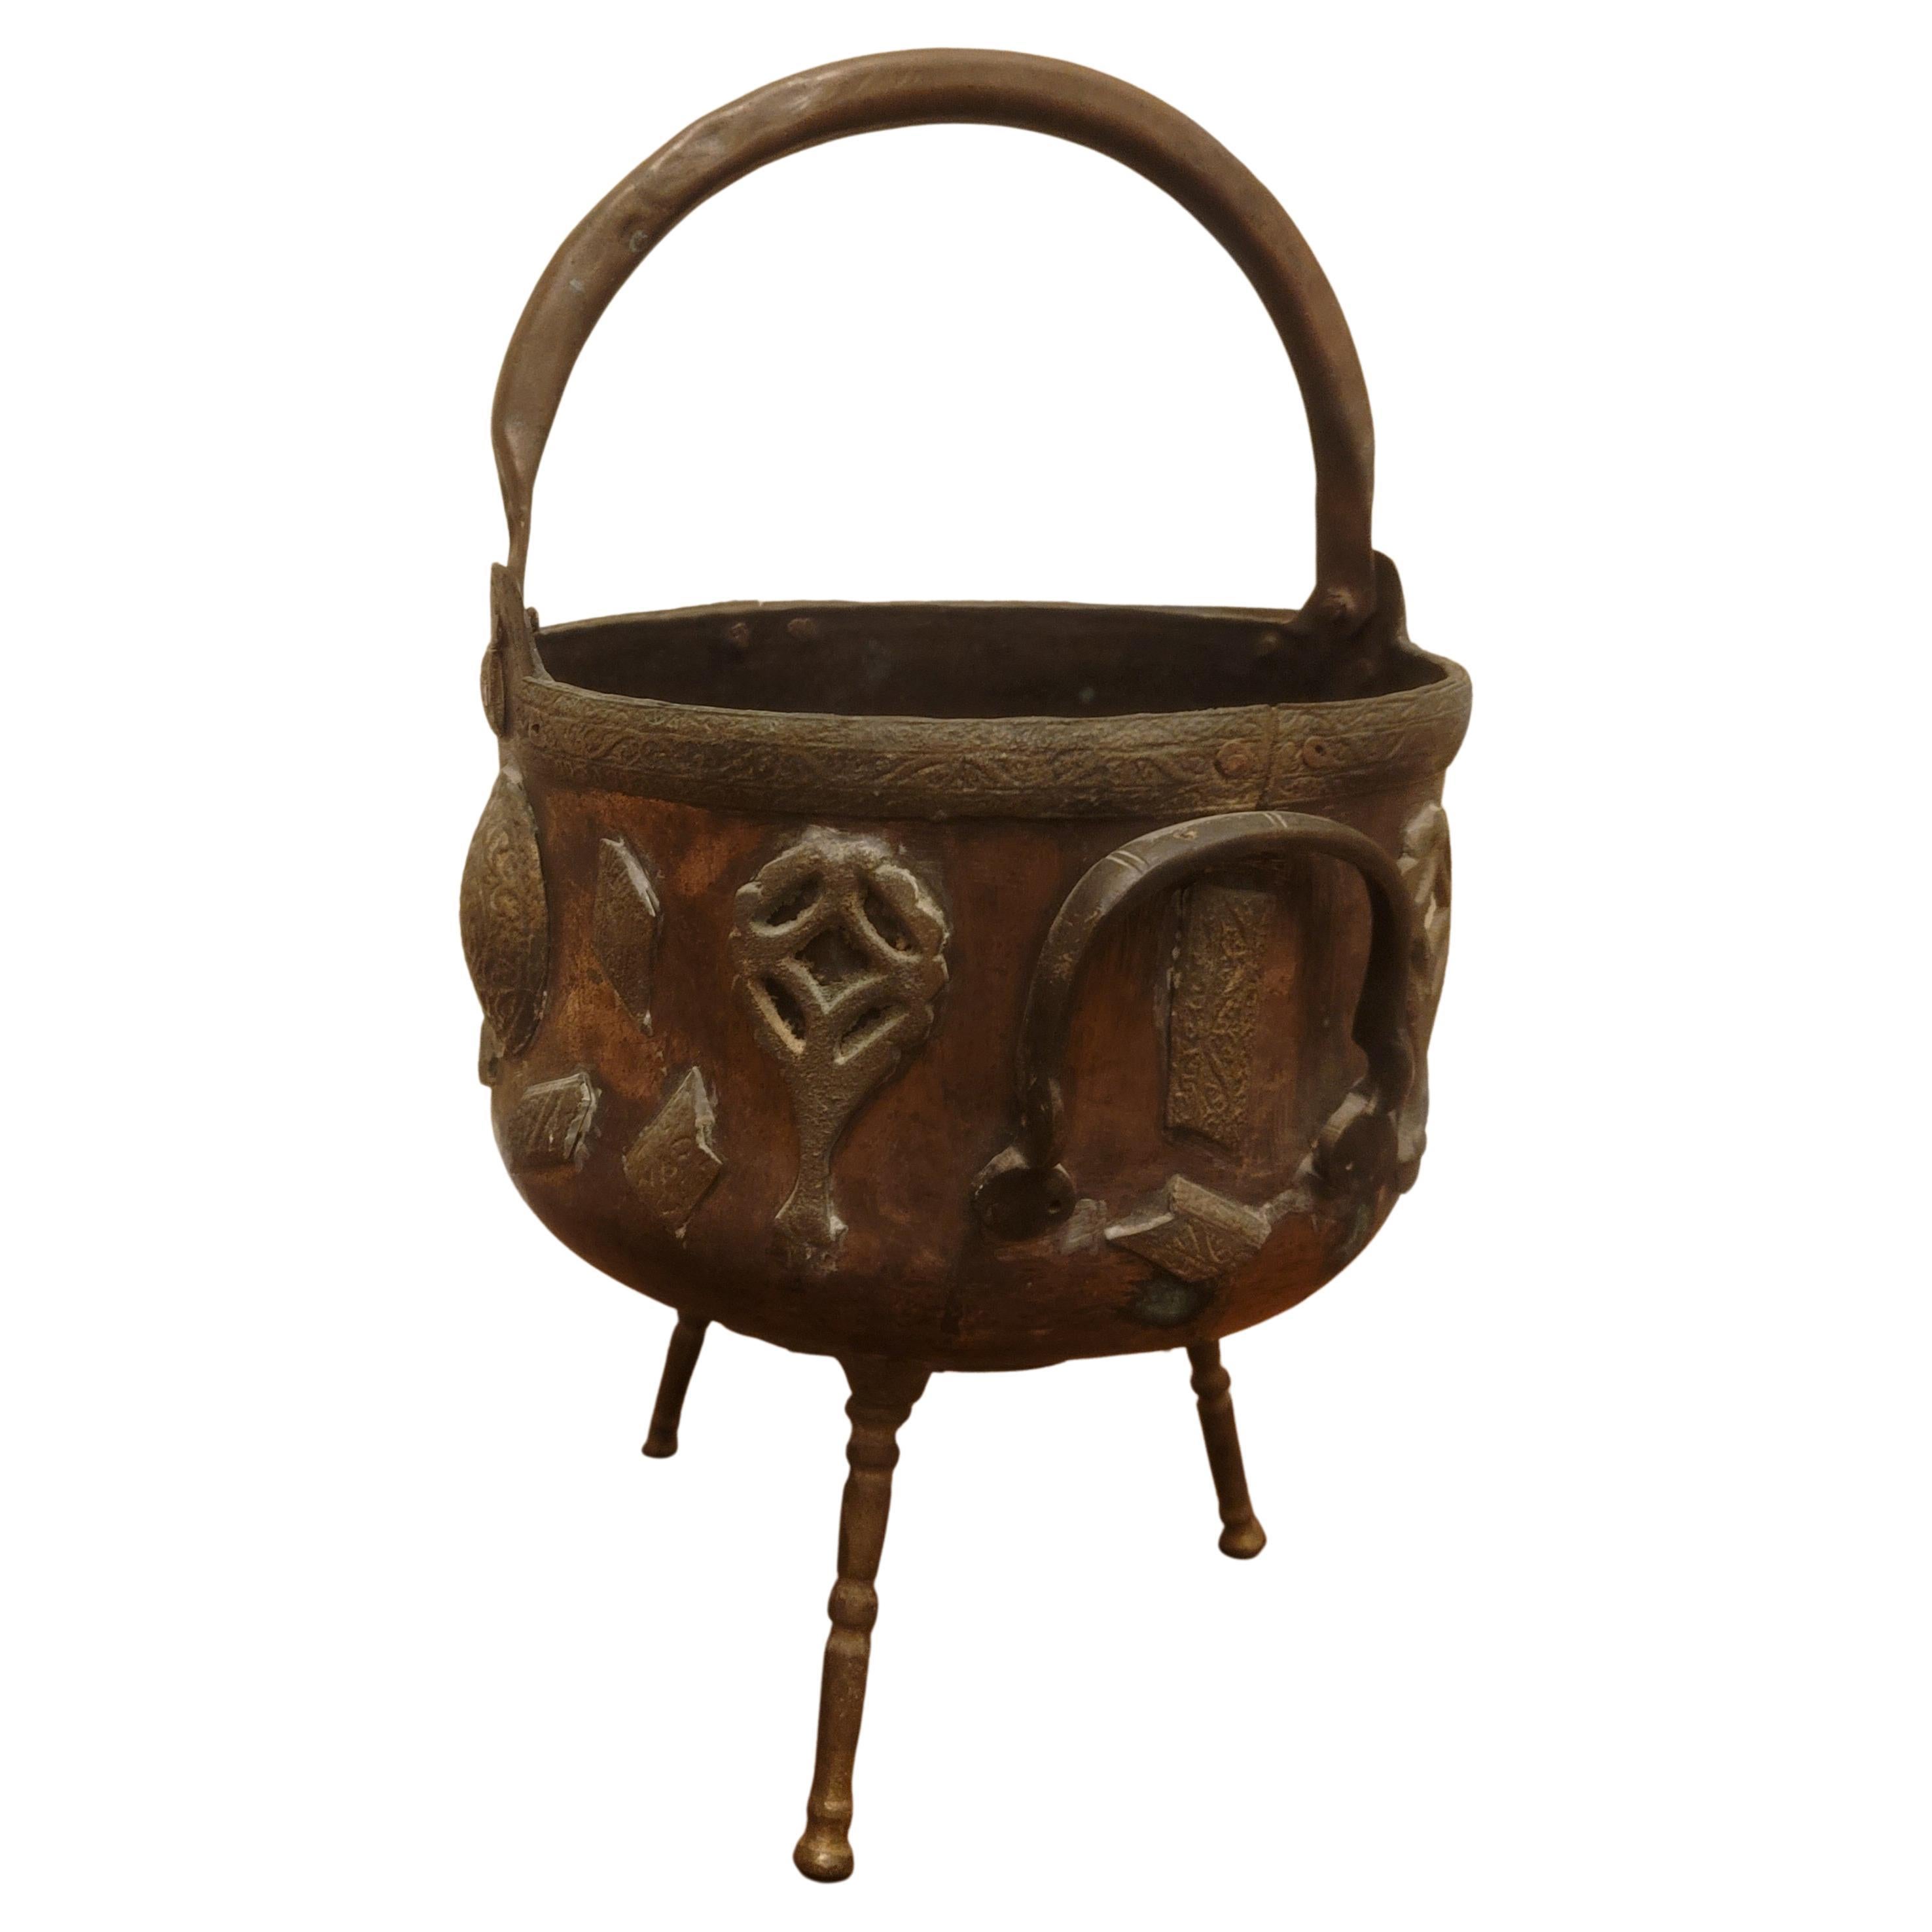 Highly decorative 19th century Arts & Crafts brass Mounted over Hammered Copper Footed Fireplace Pail bucket, with hammered copper handle. May be used as a log holder or as a planter. Measures 12 inches in diameter and stand 17 inches tall to the